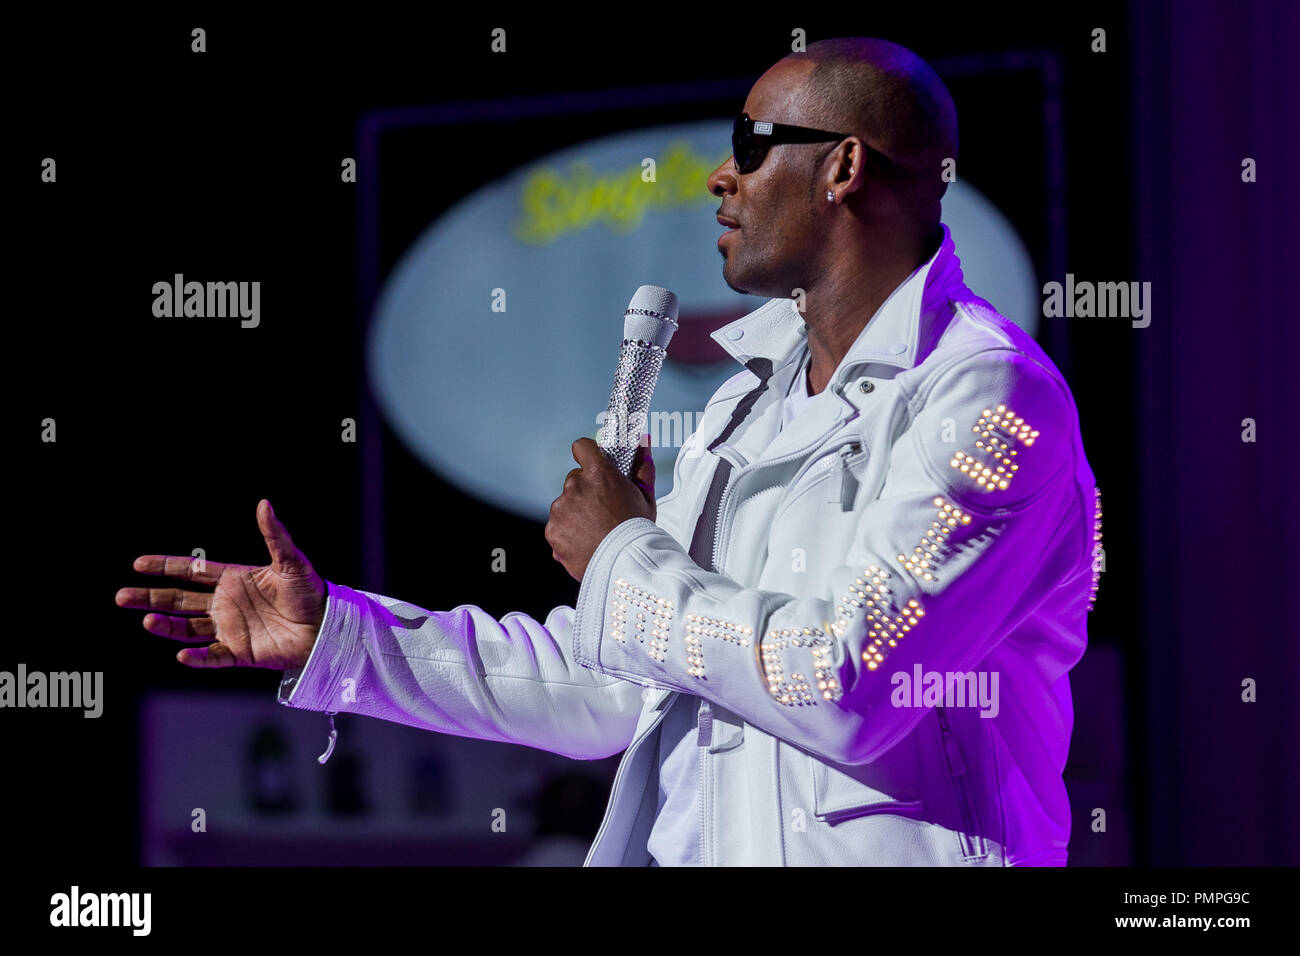 R Kelly performs during his 'Single Ladies' tour at Nokia Theatre L.A. LIVE on November 2, 2012 in Los Angeles. CA. Photo by Eden Ari / PRPP / PictureLux  File Reference # 31687 012PRPPEA  For Editorial Use Only -  All Rights Reserved Stock Photo